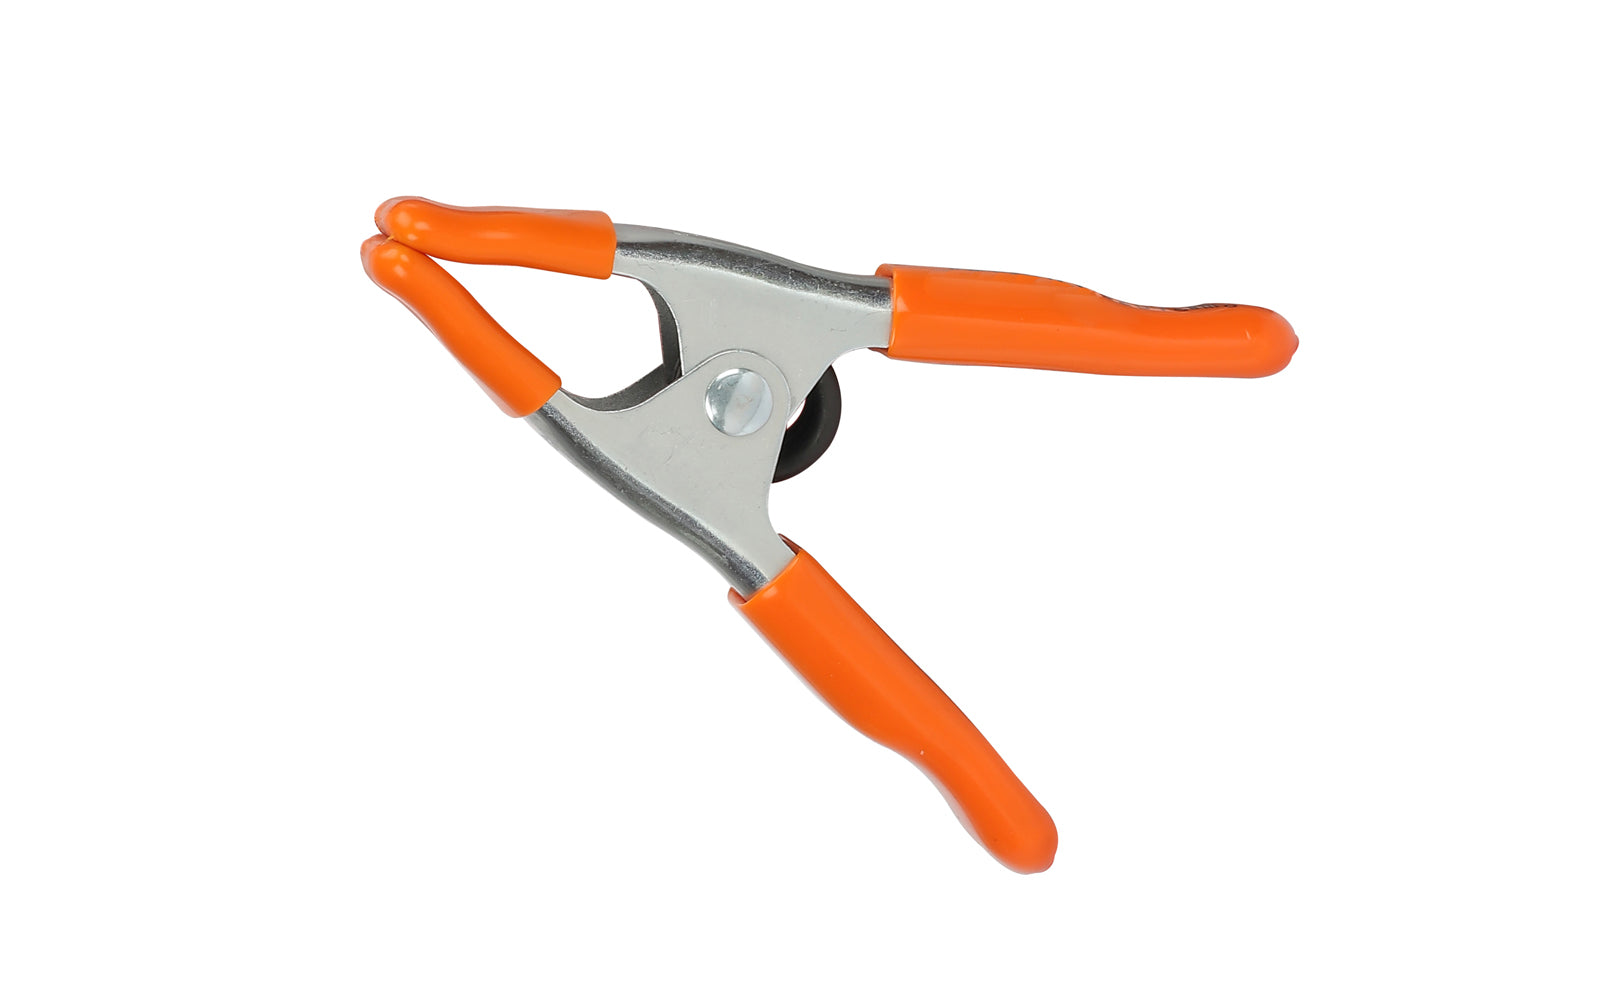 Pony 1" Opening Classic Spring Clamp ~ No. 3201-HT - With protected poly-vinyl handles & tips - Pony / Jorgensen - poly-vinyl protected handles & jaw tips mean you can use them on metal, wood, plastic, fabric - 1" max opening - Steel Spring Clamp